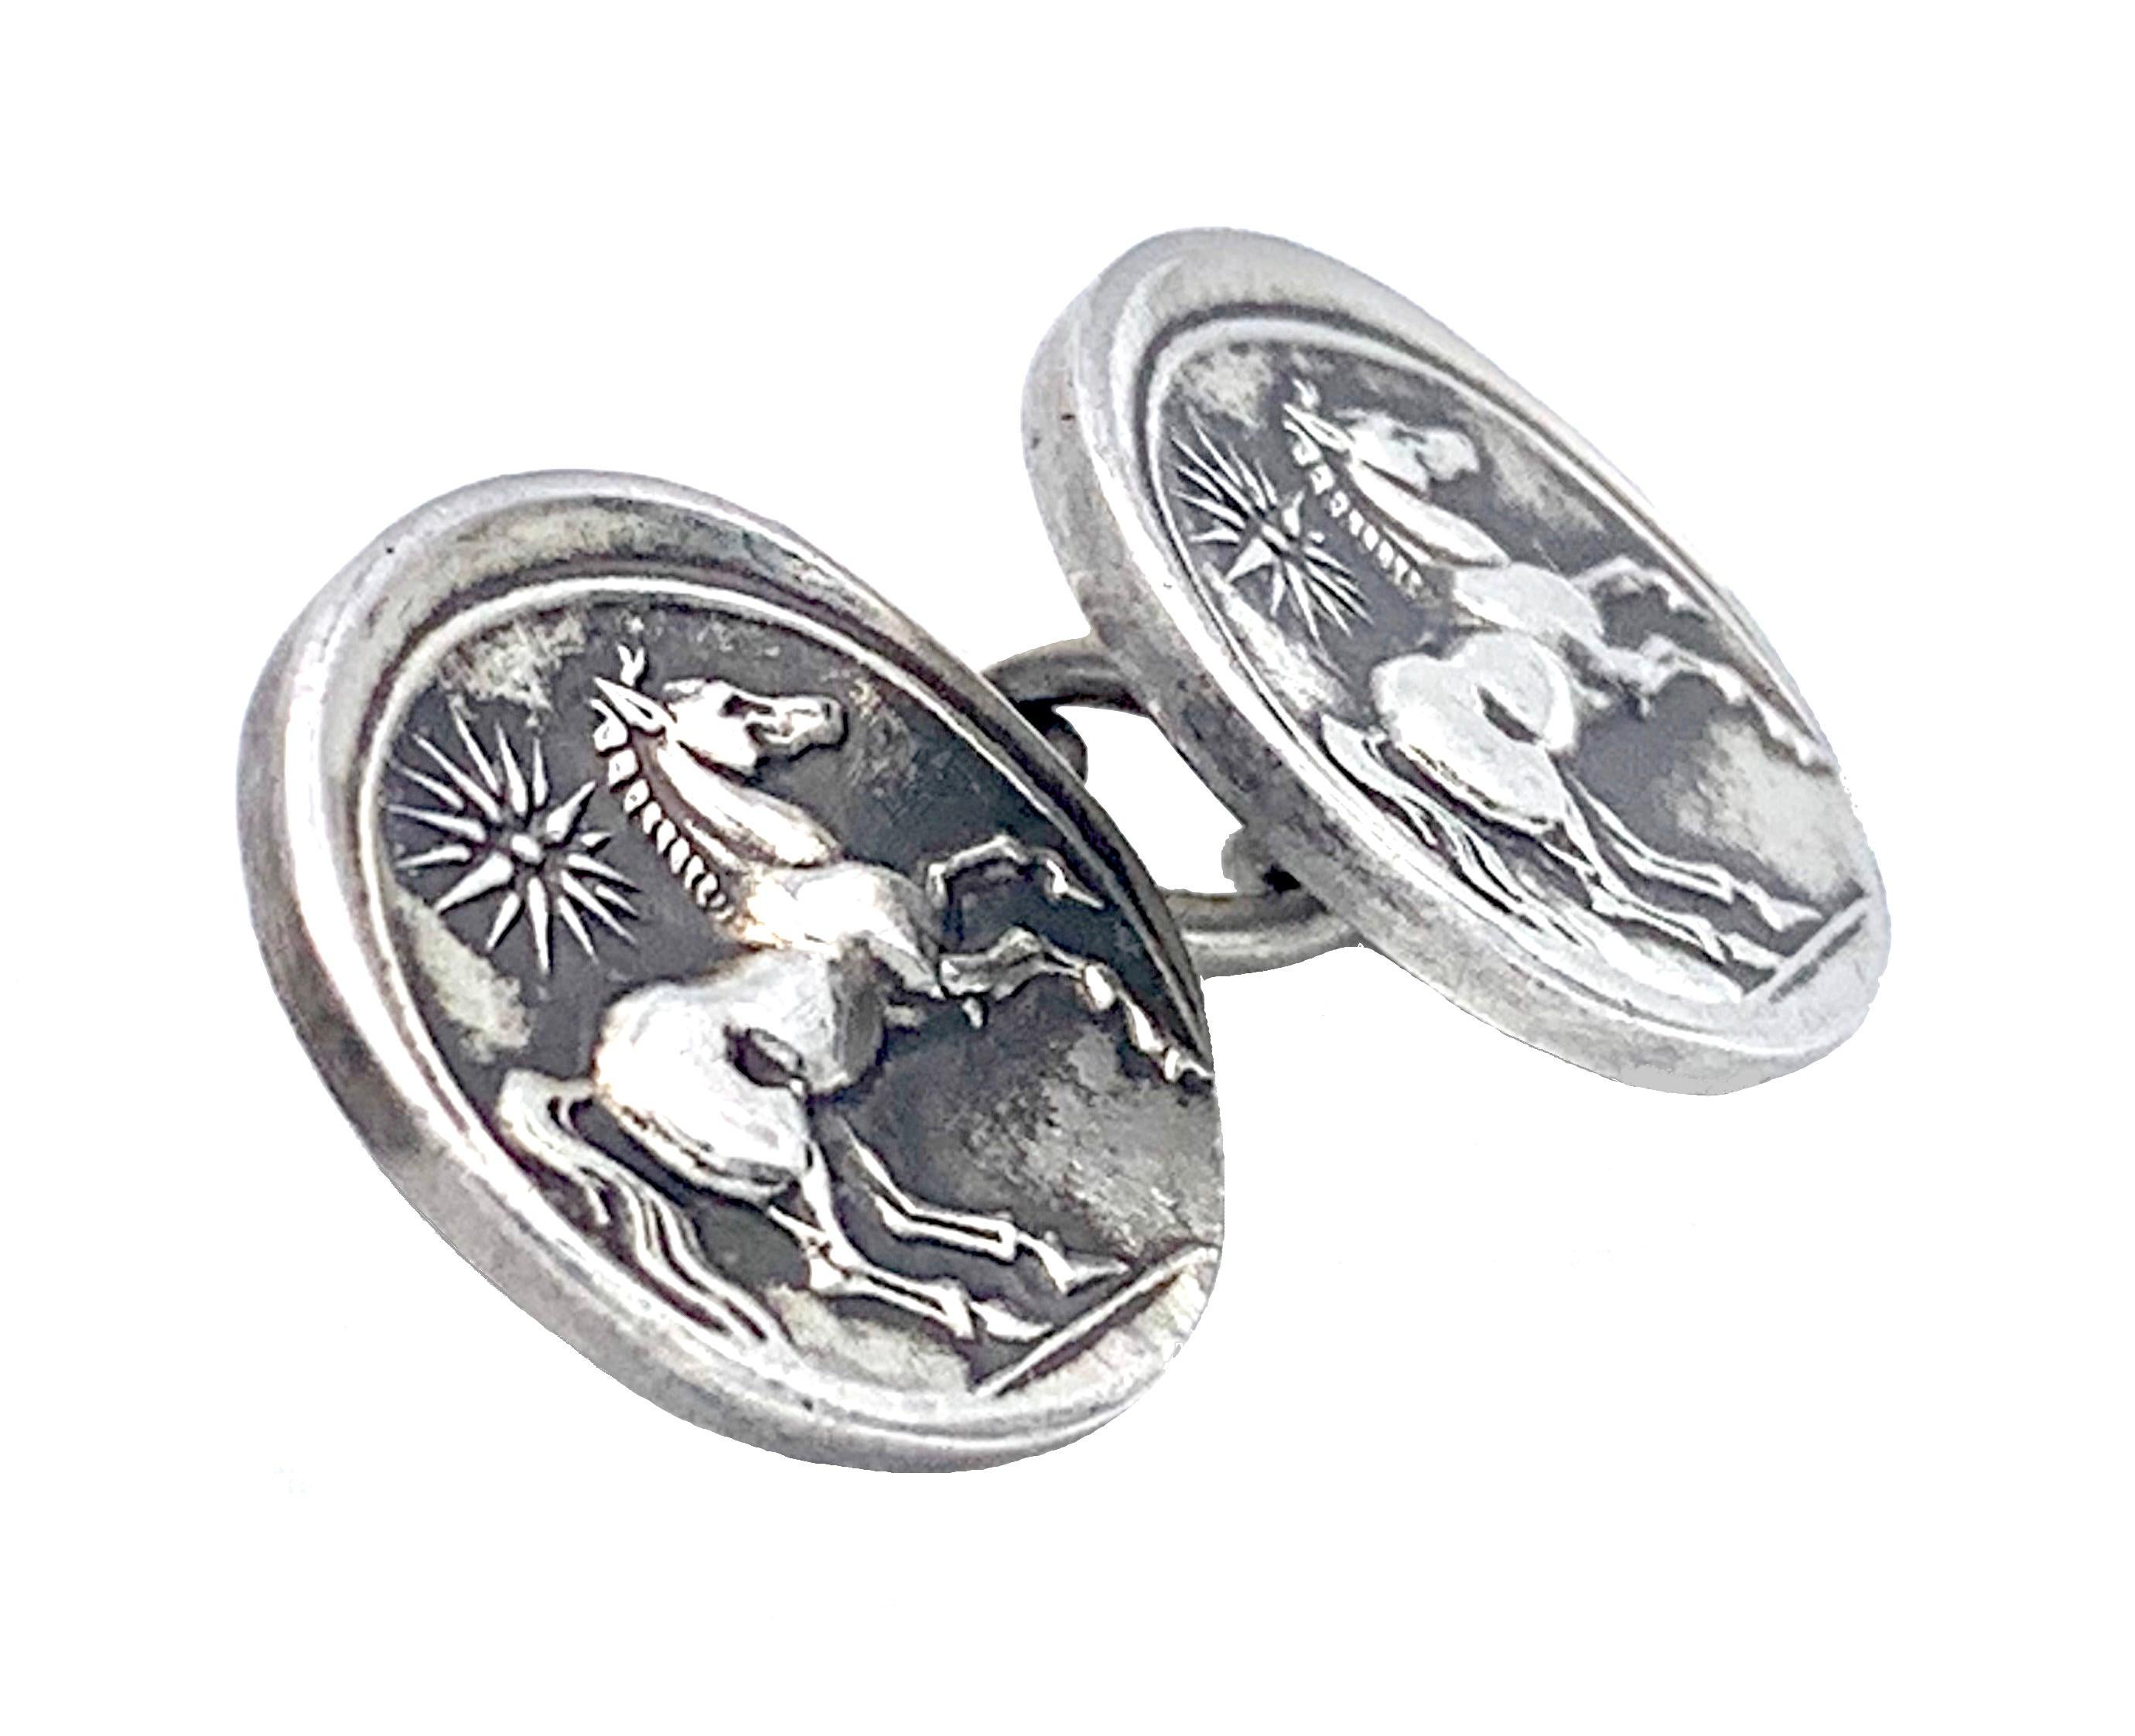 These charming cufflinks feature on each button a horse in motion and a radiant sun above it. The design may possibly have been inspired by antique greek coins. The cufflinks are impressed with unidentified hallmarks.
The dimensions cited apply to